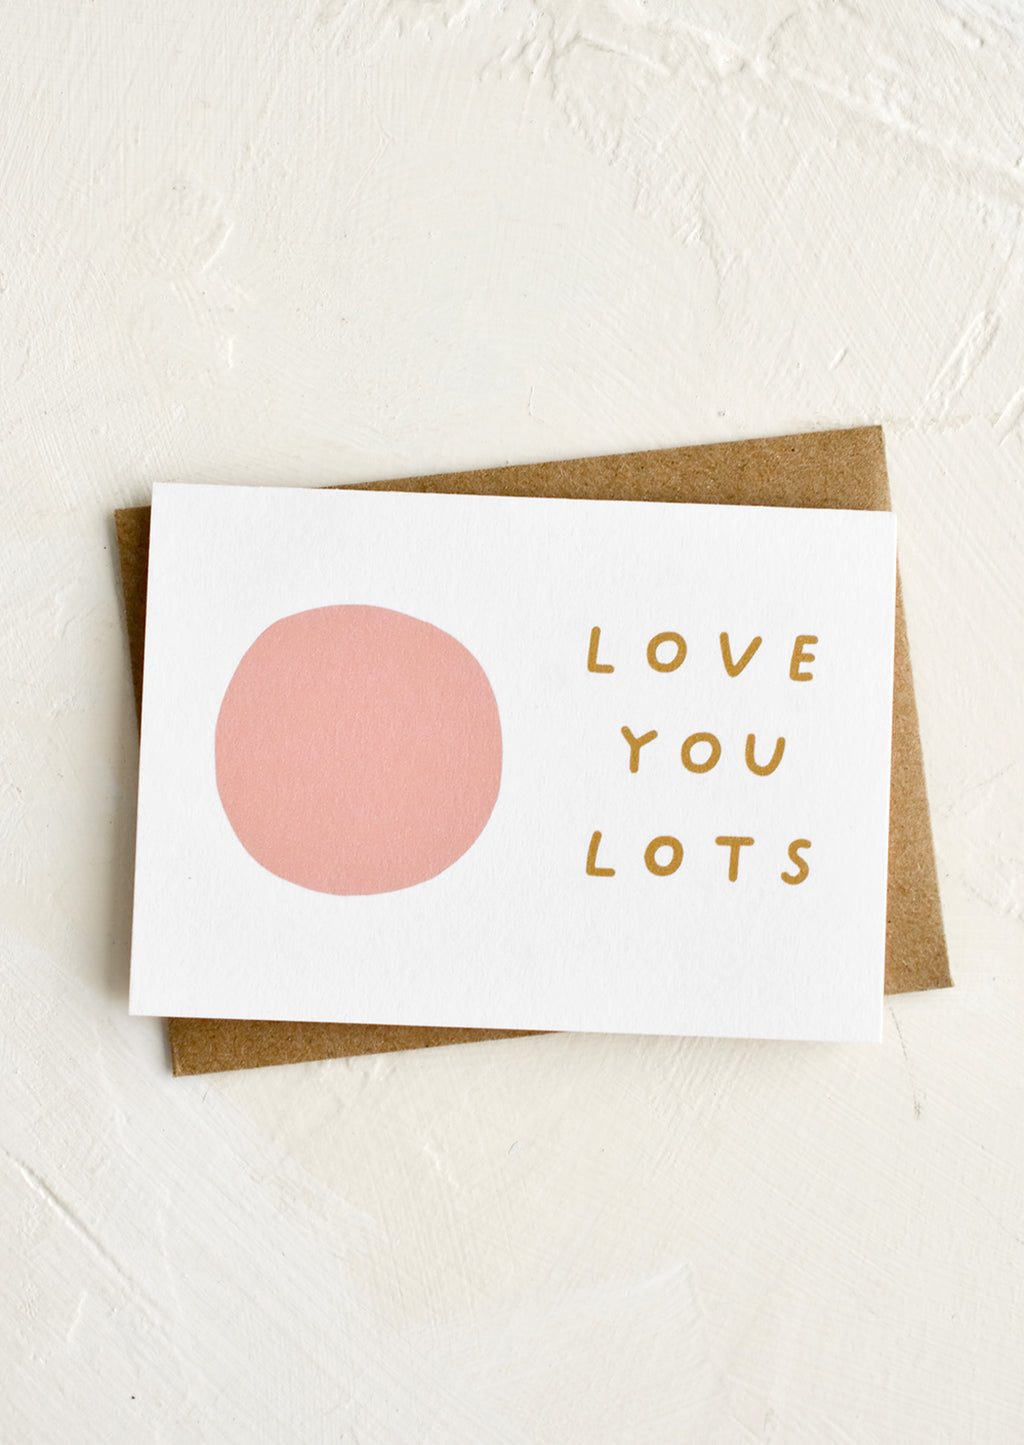 Love You Lots: A mini greeting card reading "LOVE YOU LOTS".